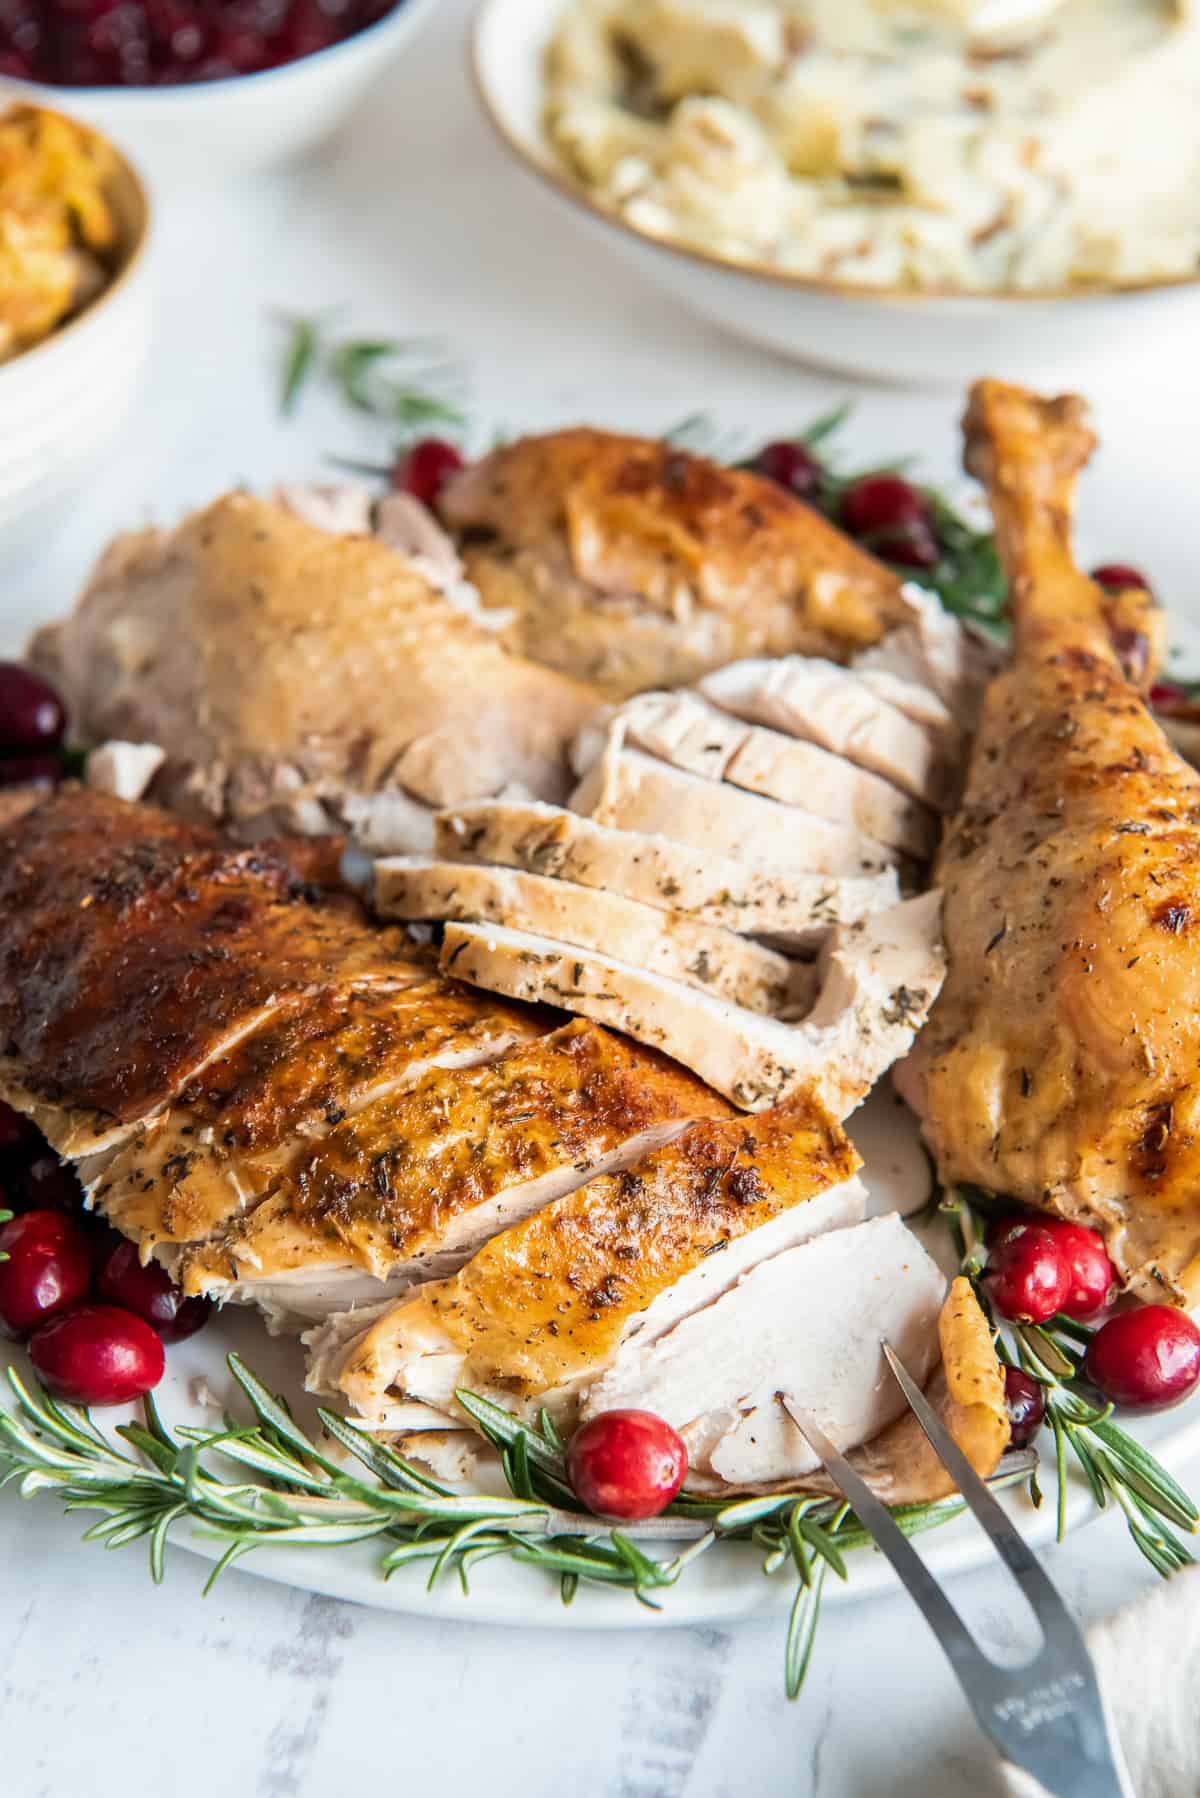 Sliced turkey on a platter with herbs and cranberries.